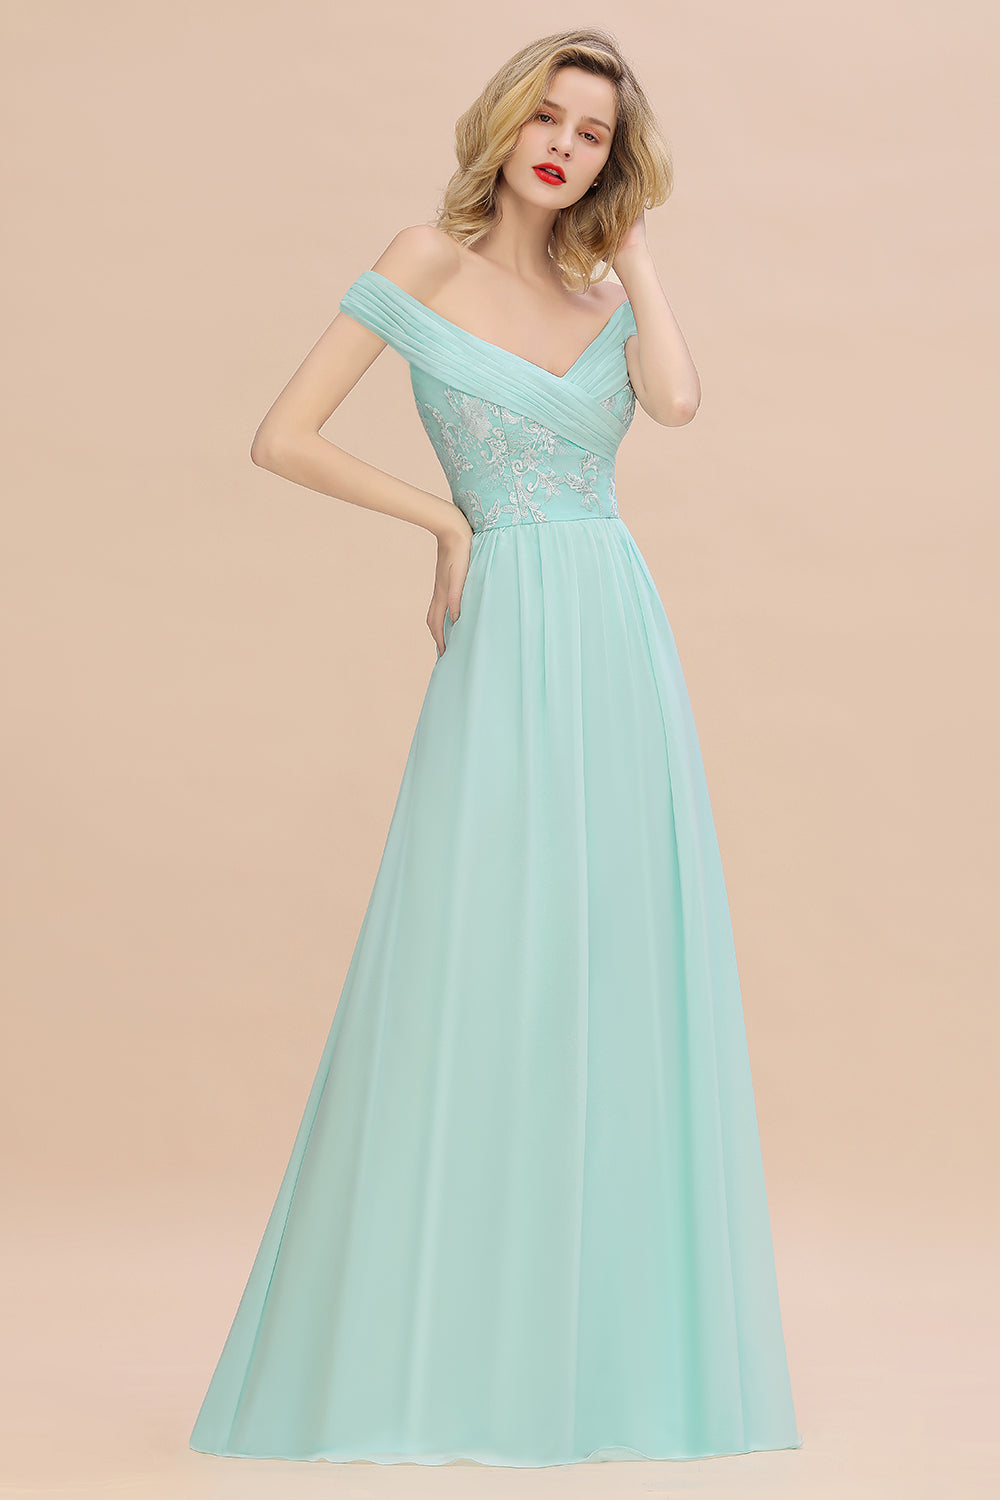 Simple Long A-line Ruffles Off-the-shoulder Bridesmaid Dress with Appliques Lace-BIZTUNNEL